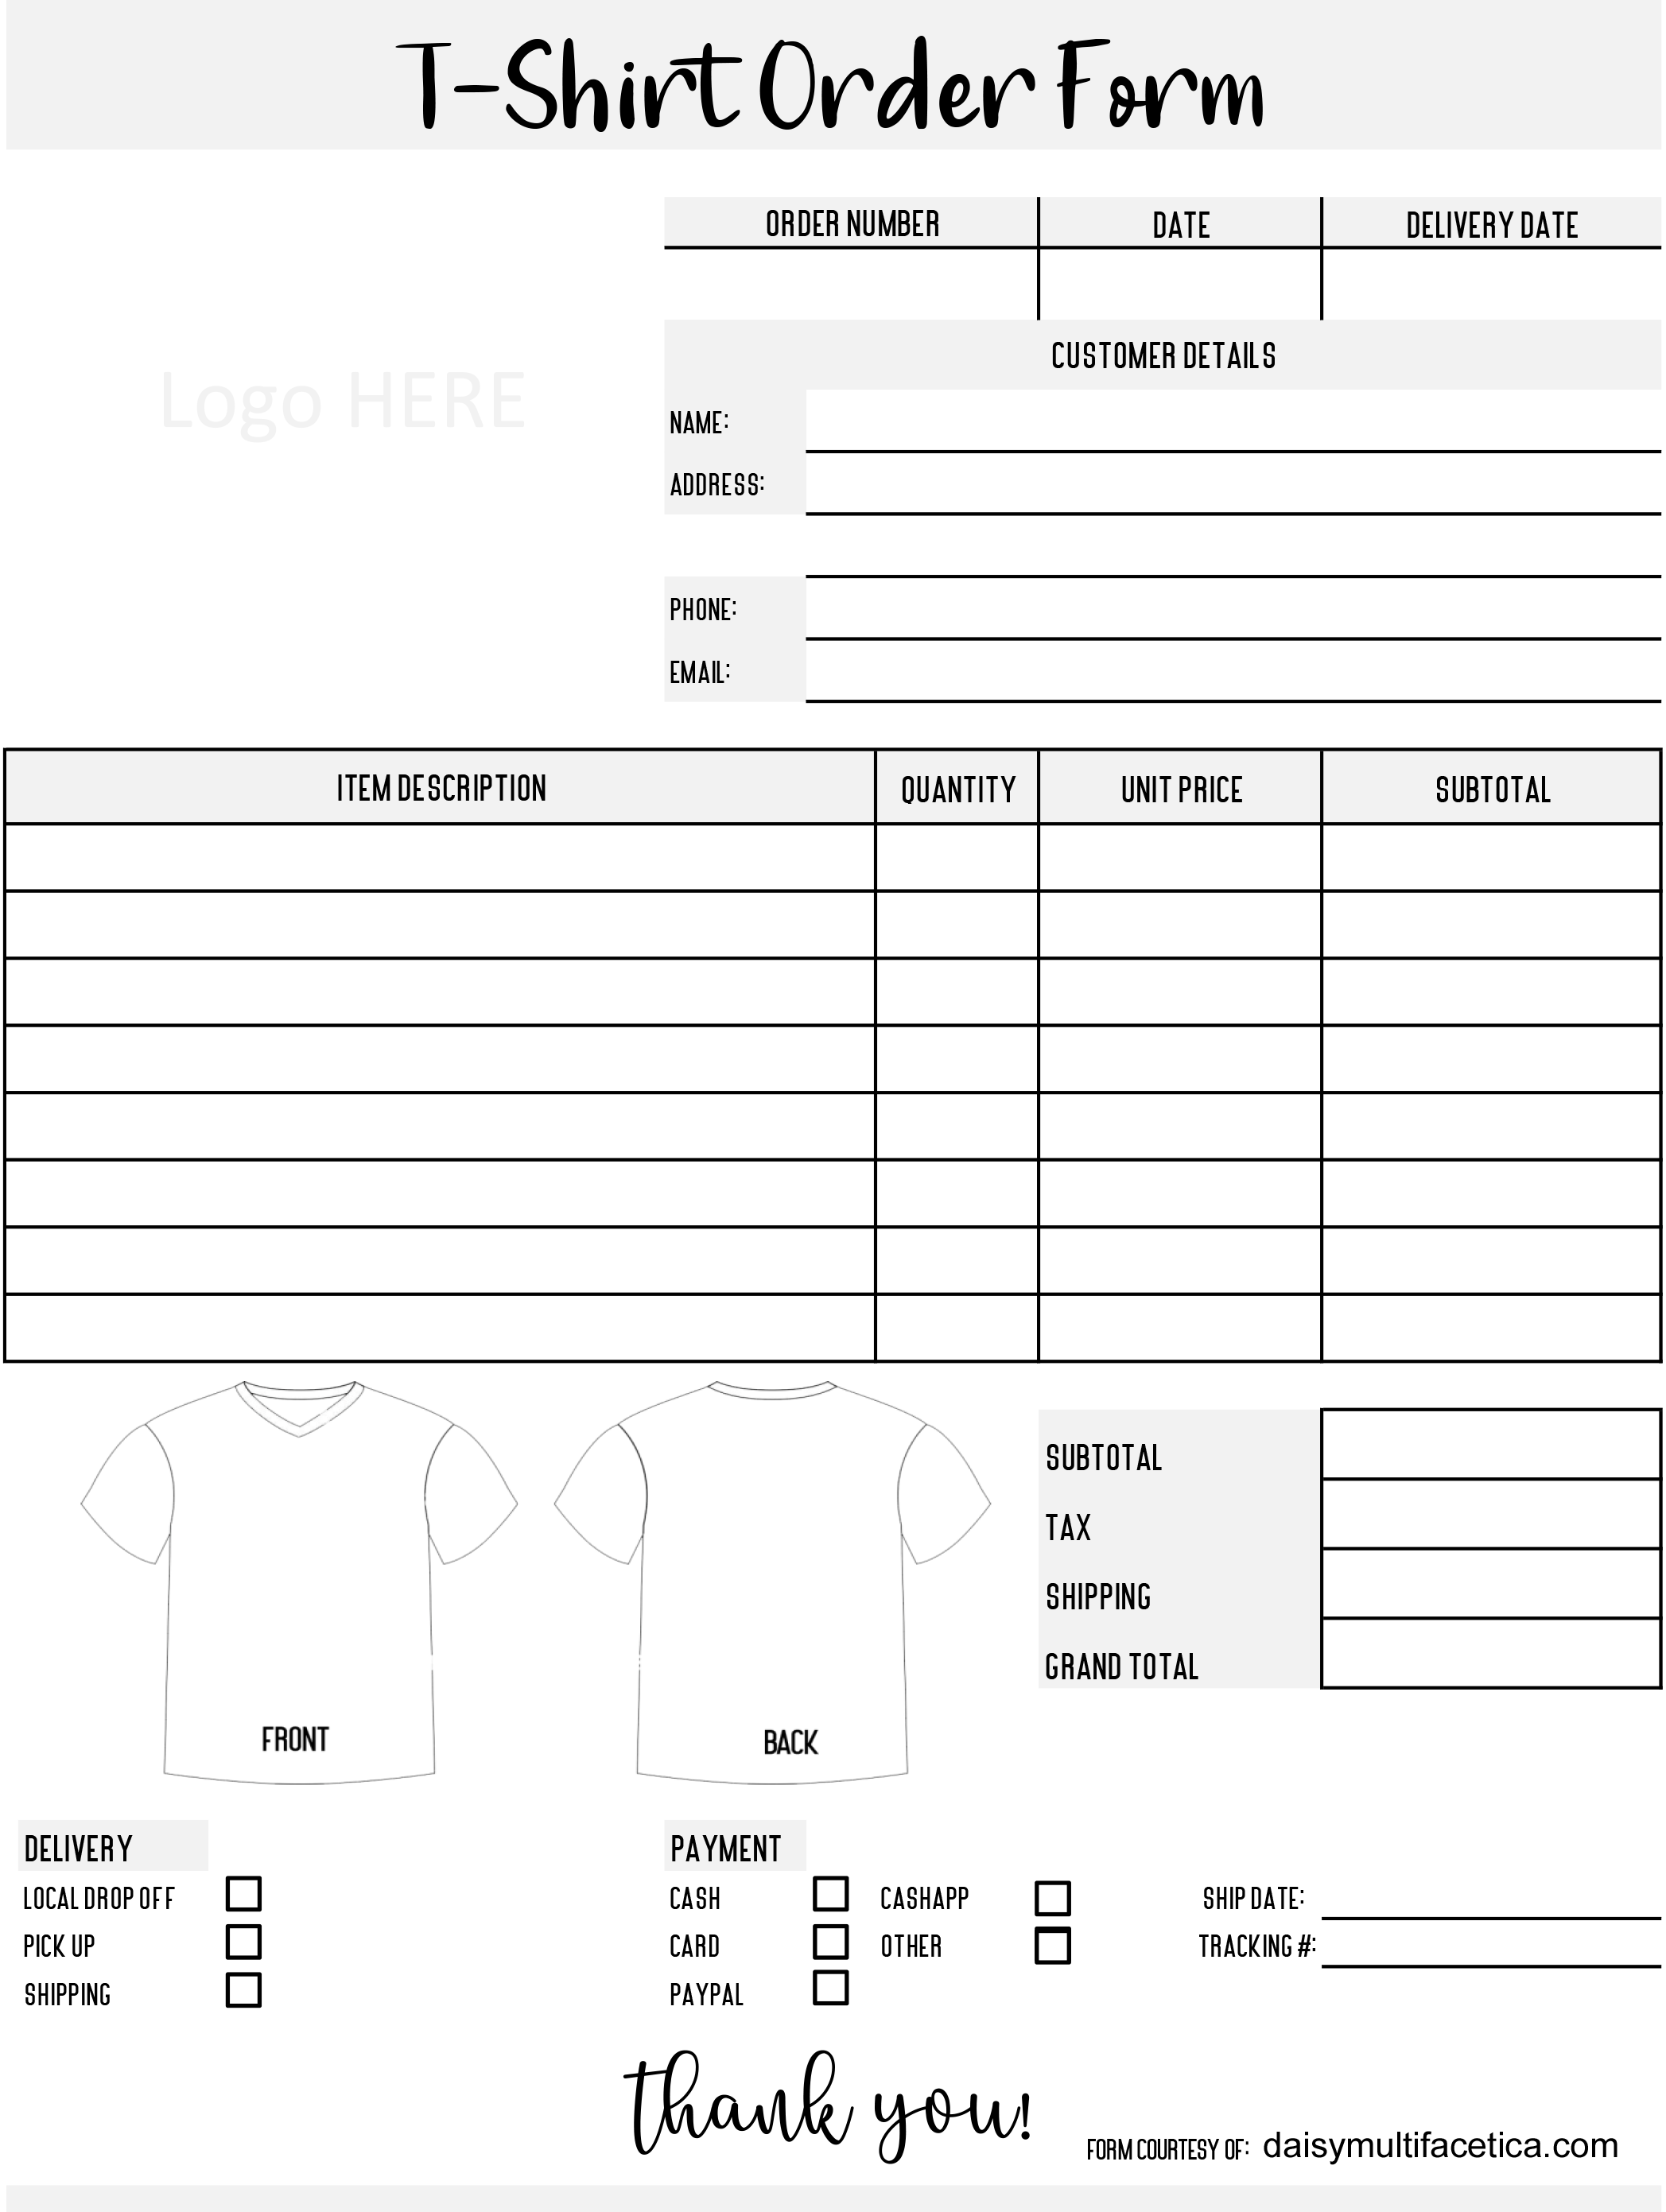 Shirt Order Form T Shirt Order Form Template Edit In Canva lupon gov ph